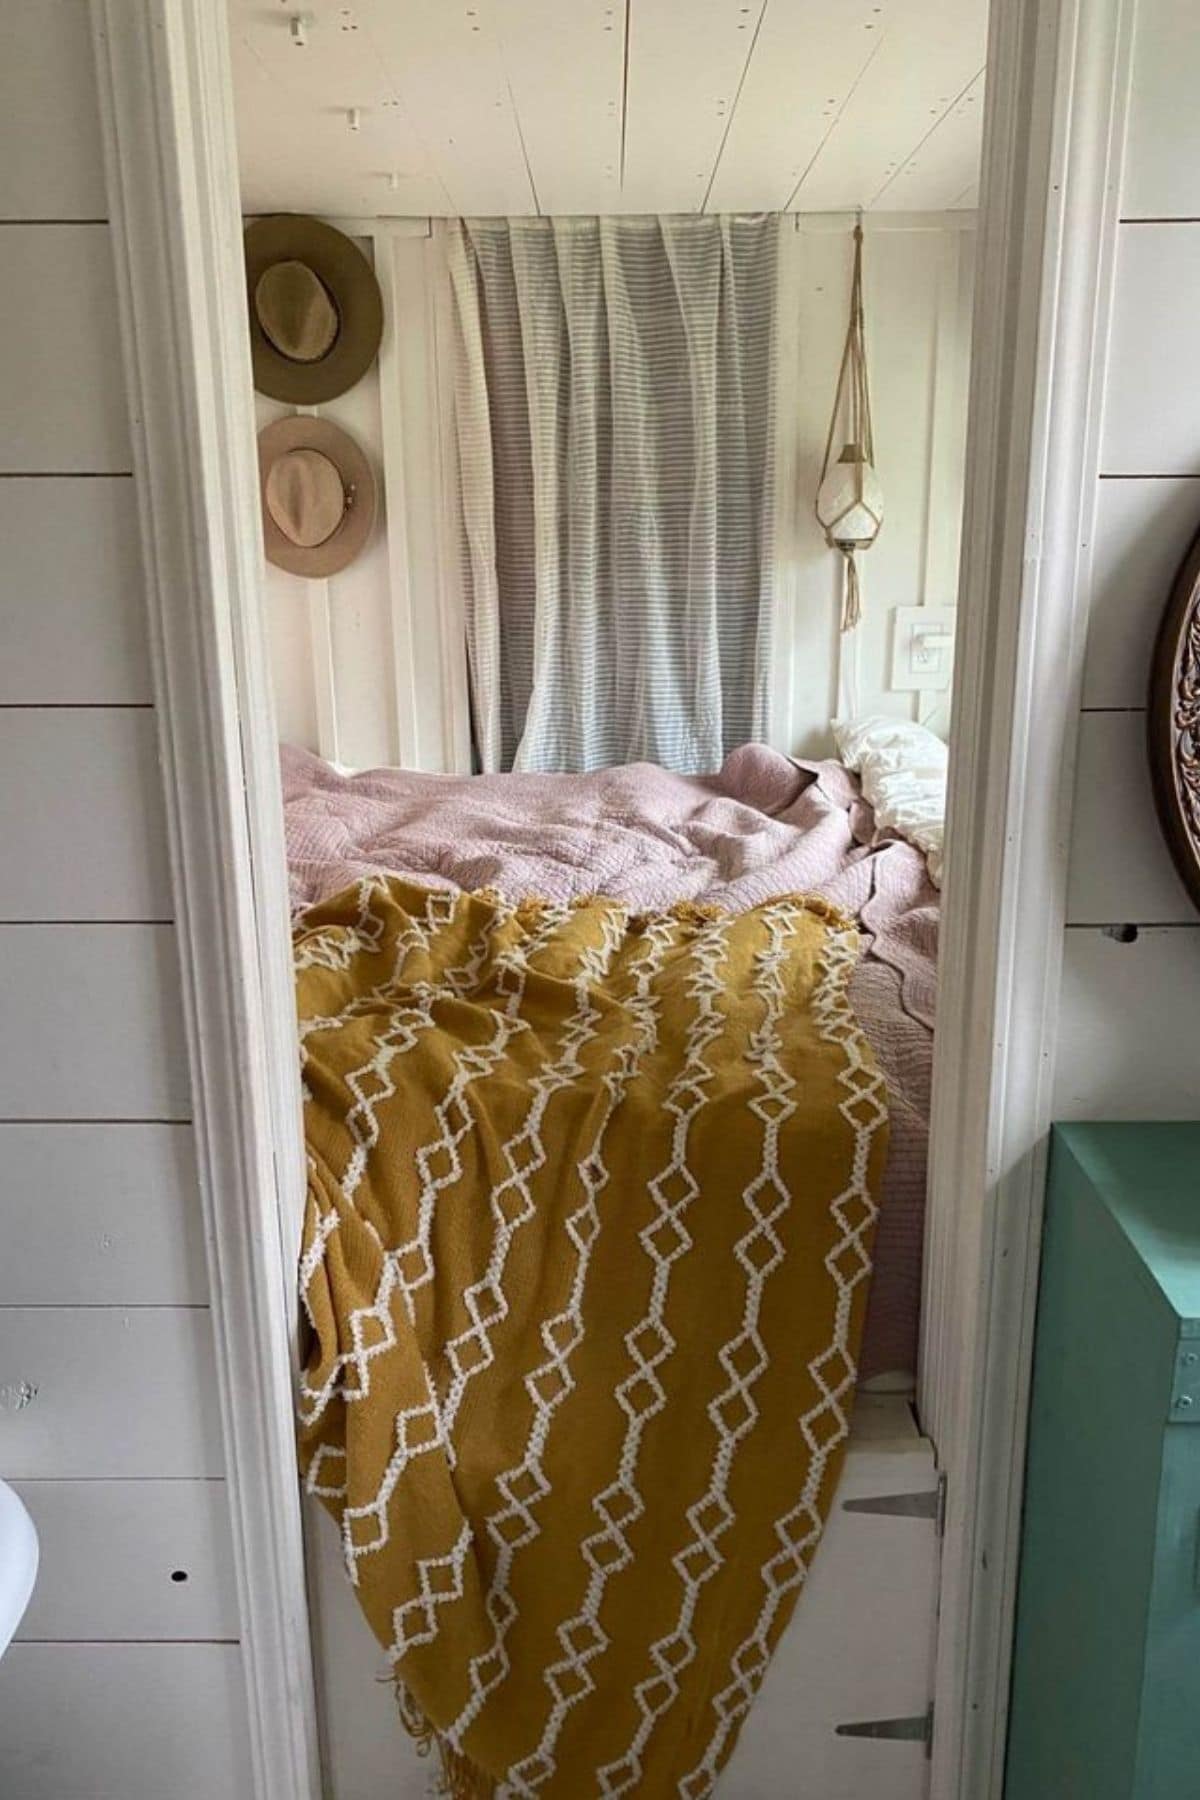 view into bedroom with yellow blanket on bed and teal shelf to right of door